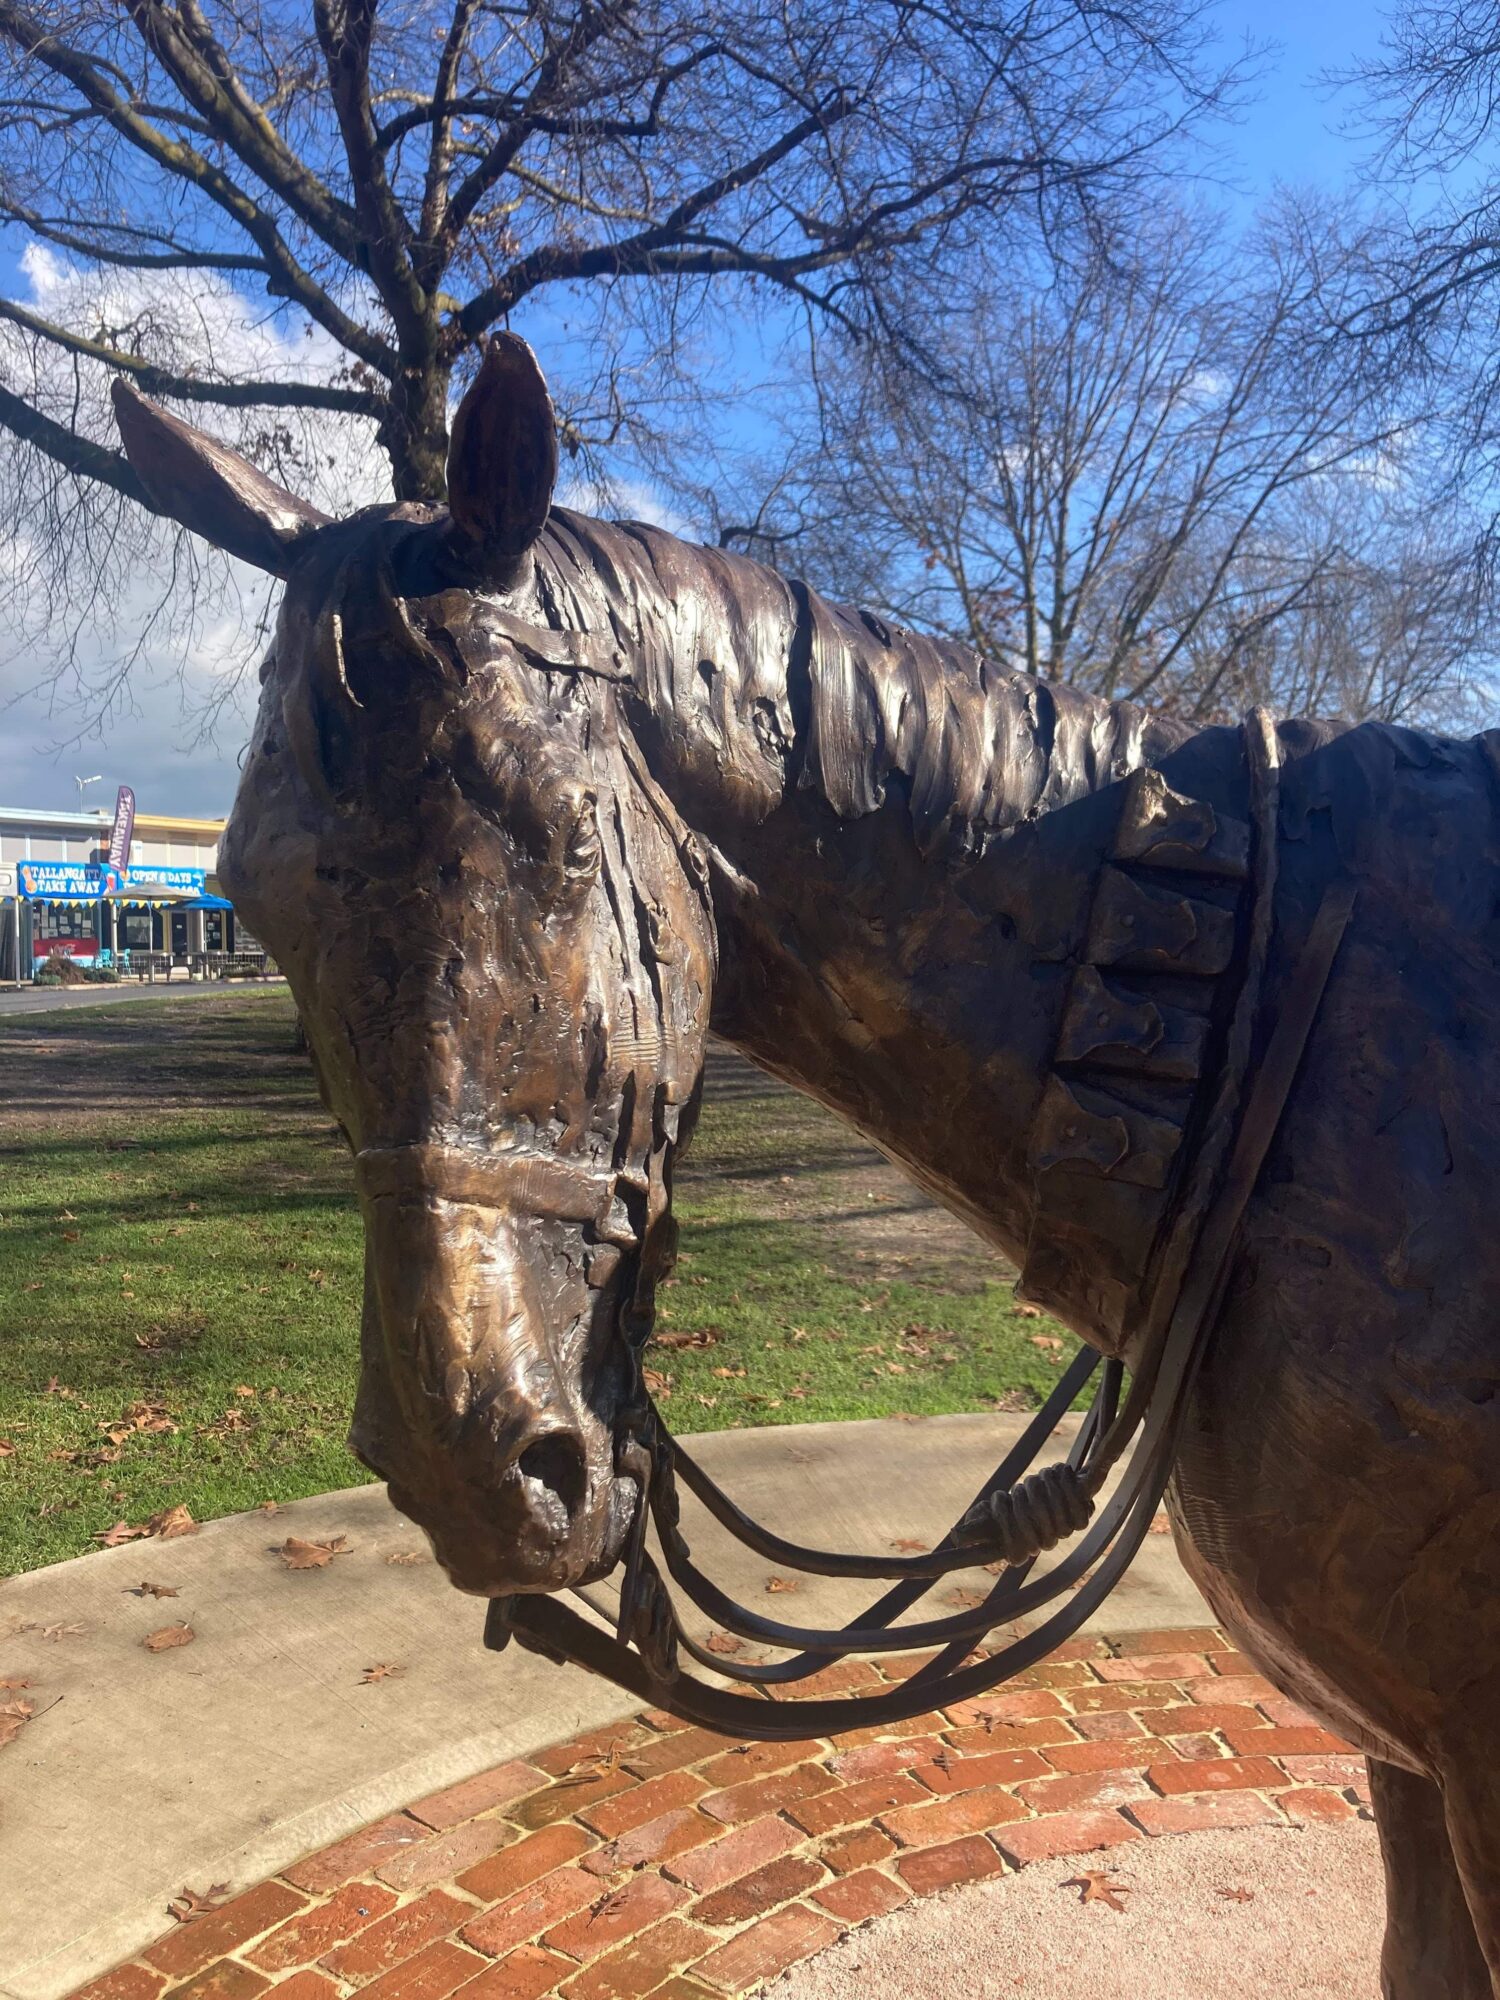 Image of the head of the Sandy the War Horse statue in Tallangatta